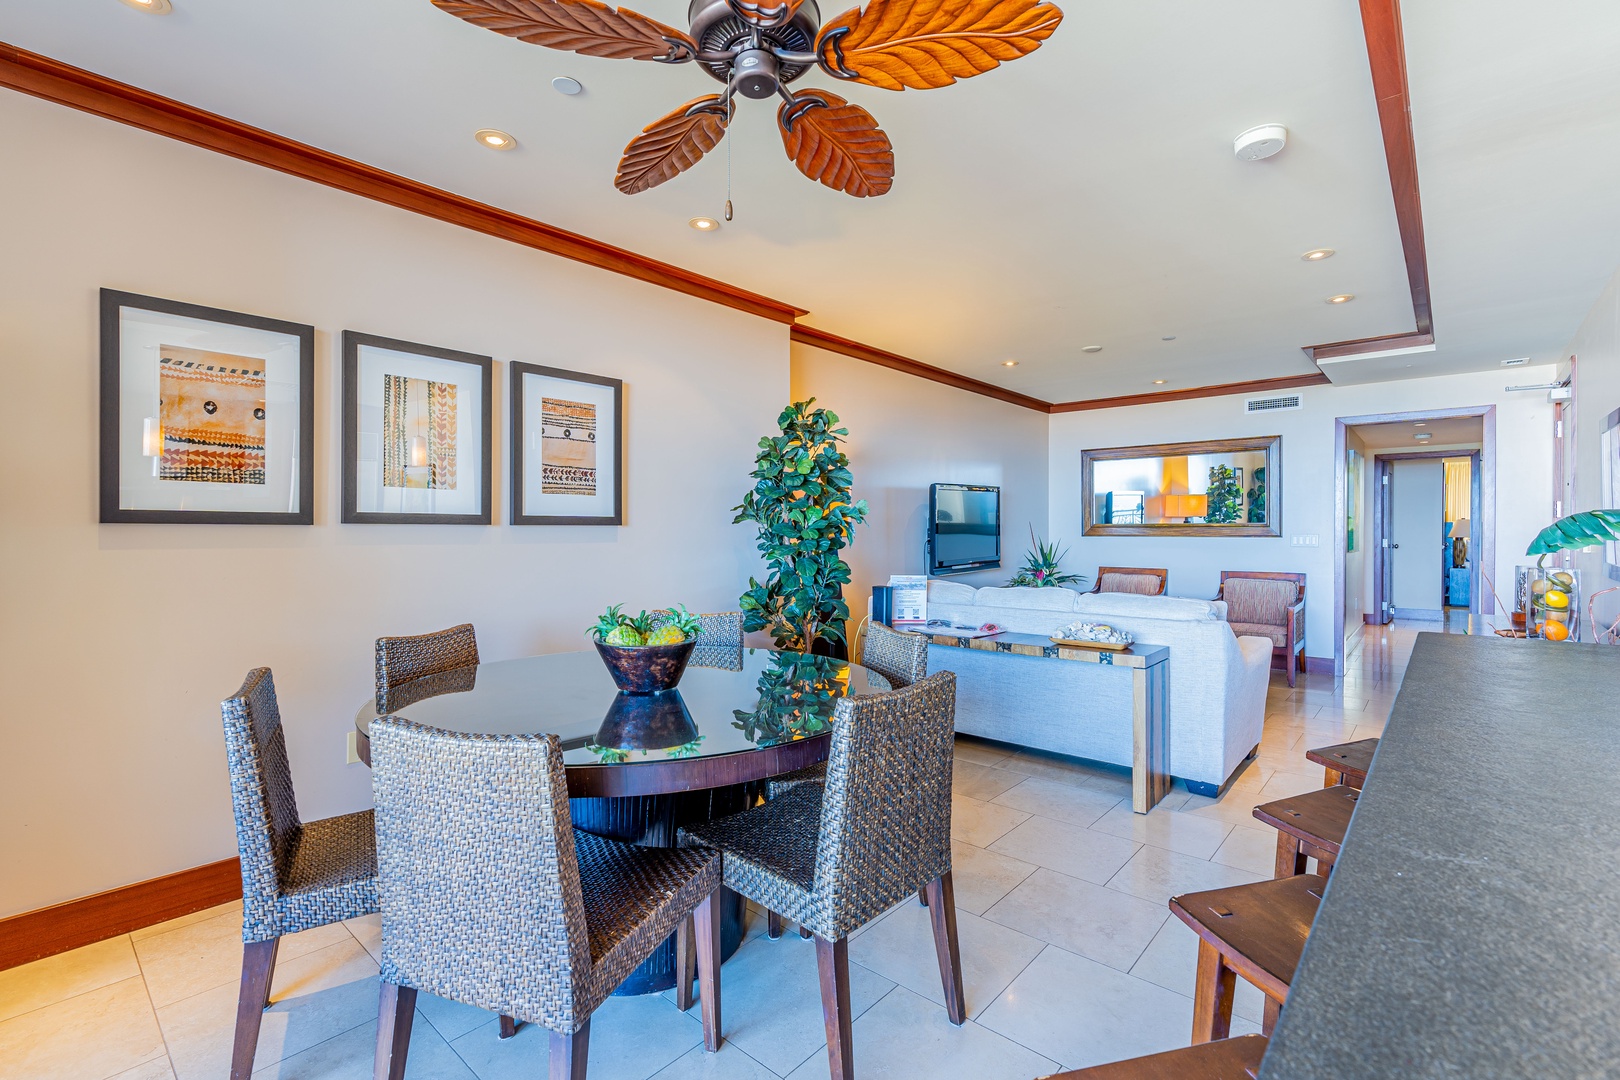 Kapolei Vacation Rentals, Ko Olina Beach Villas O704 - Tasteful decor throughout the home and TV in the living area.